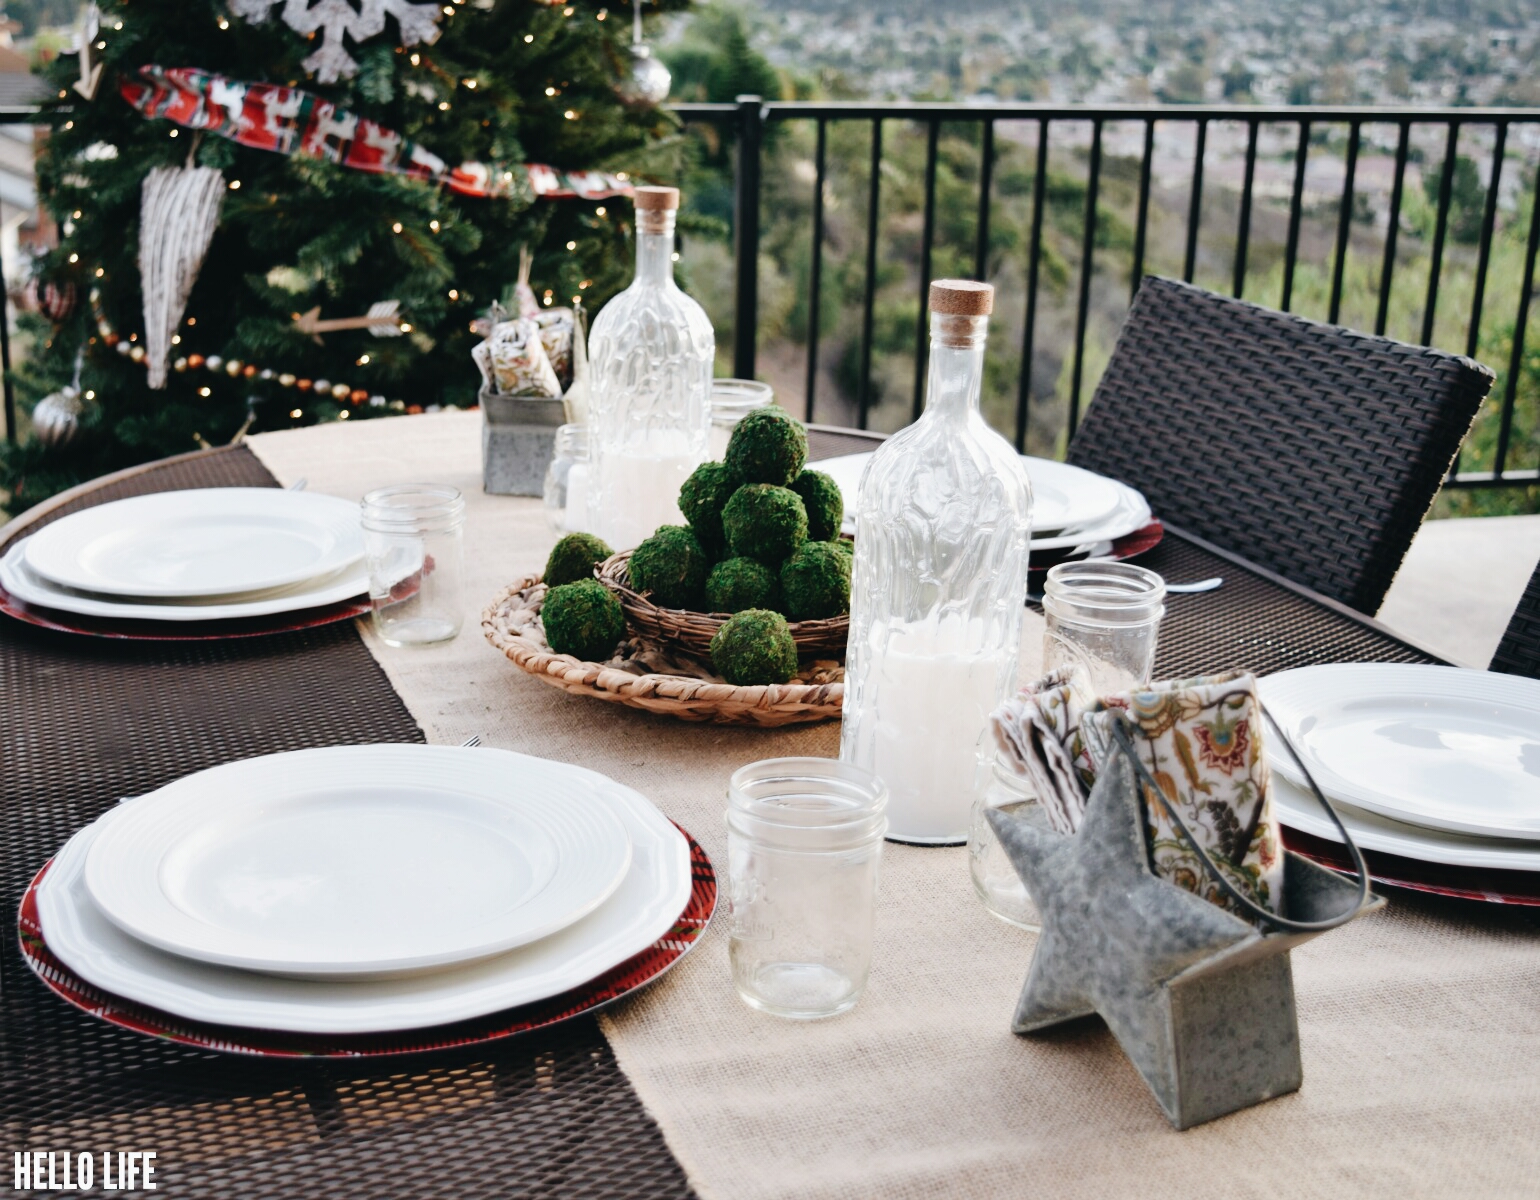 Casual Holiday Dinner Outdoors! #michaelsmakers #madebymichales #makeitwithmichaels